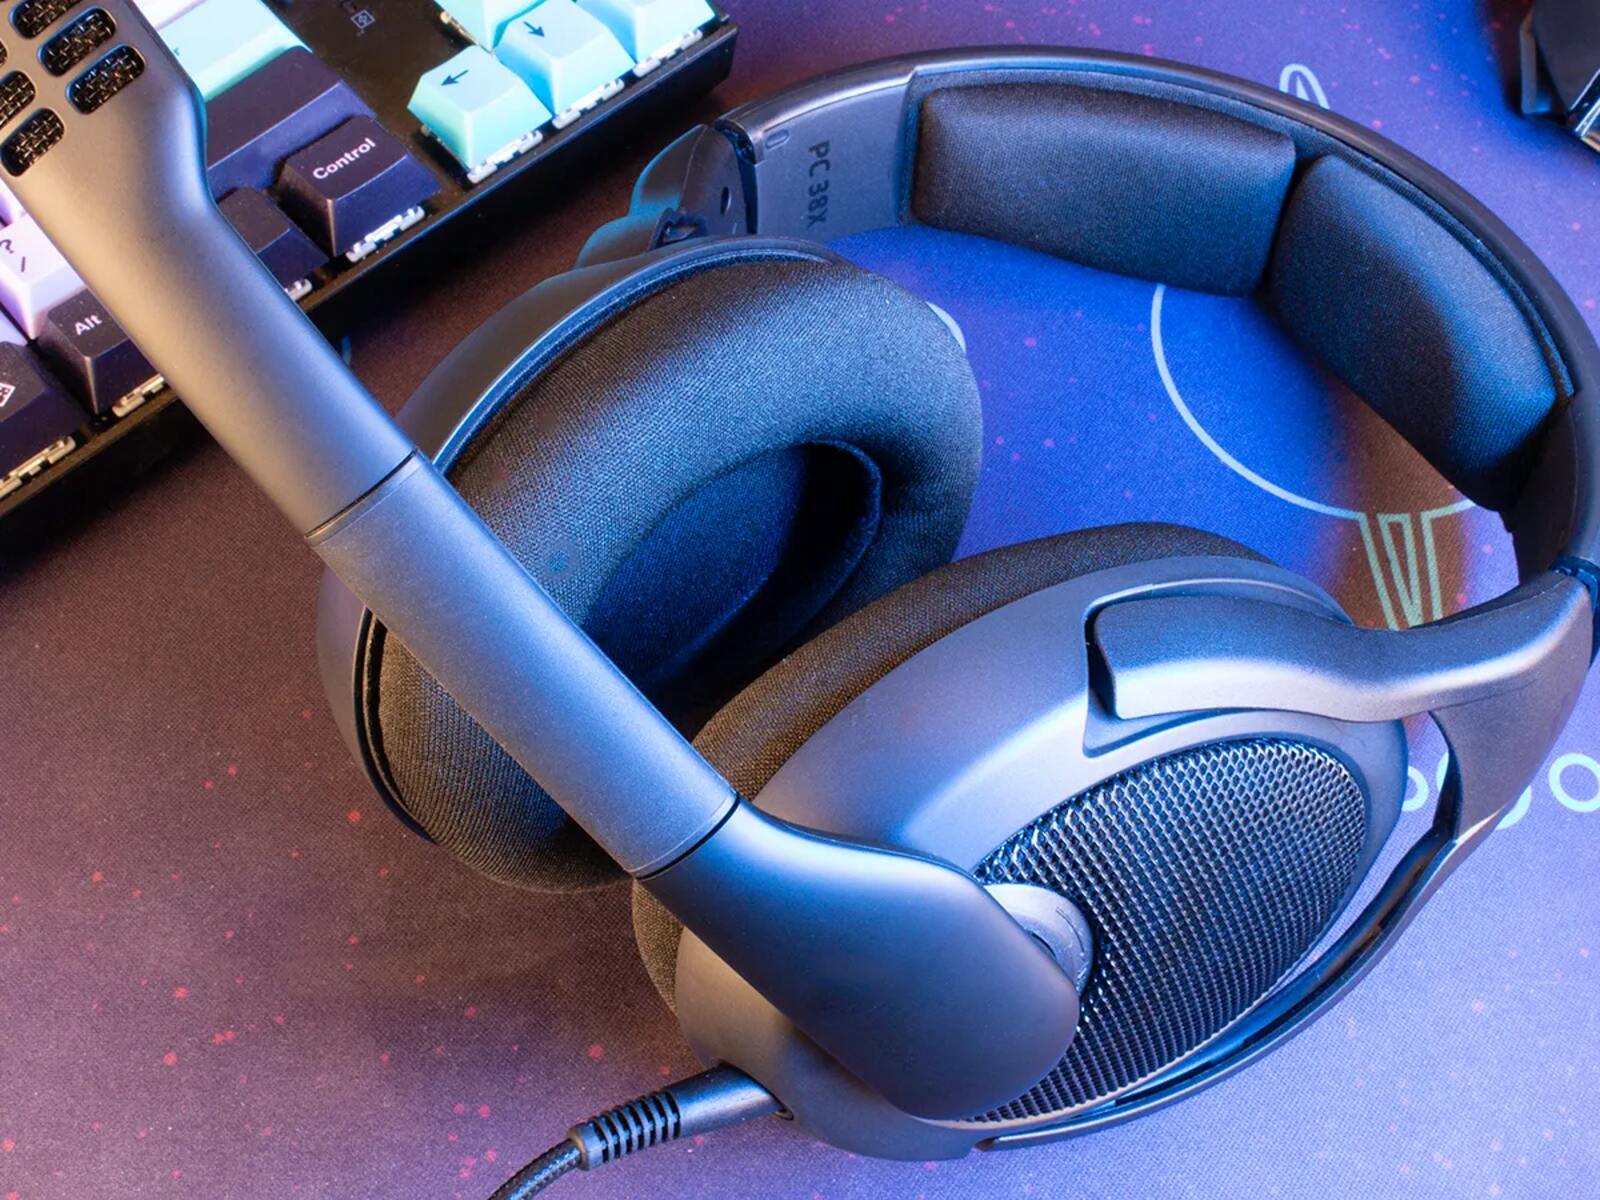 How To Keep Gaming Headset Cord Out Of The Way